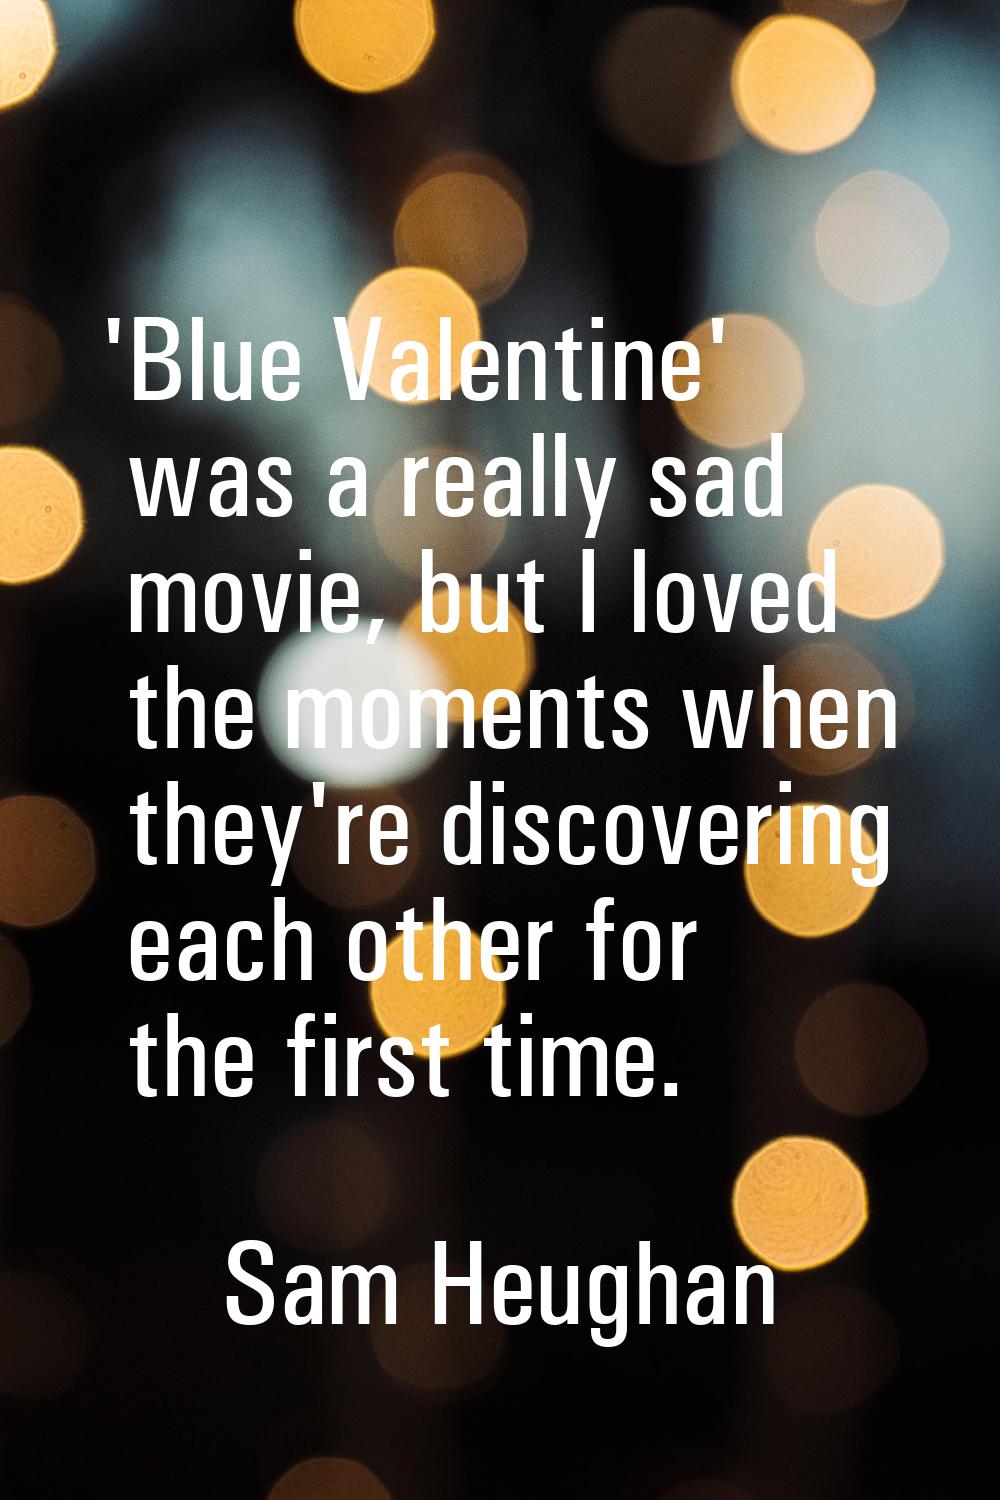 'Blue Valentine' was a really sad movie, but I loved the moments when they're discovering each othe